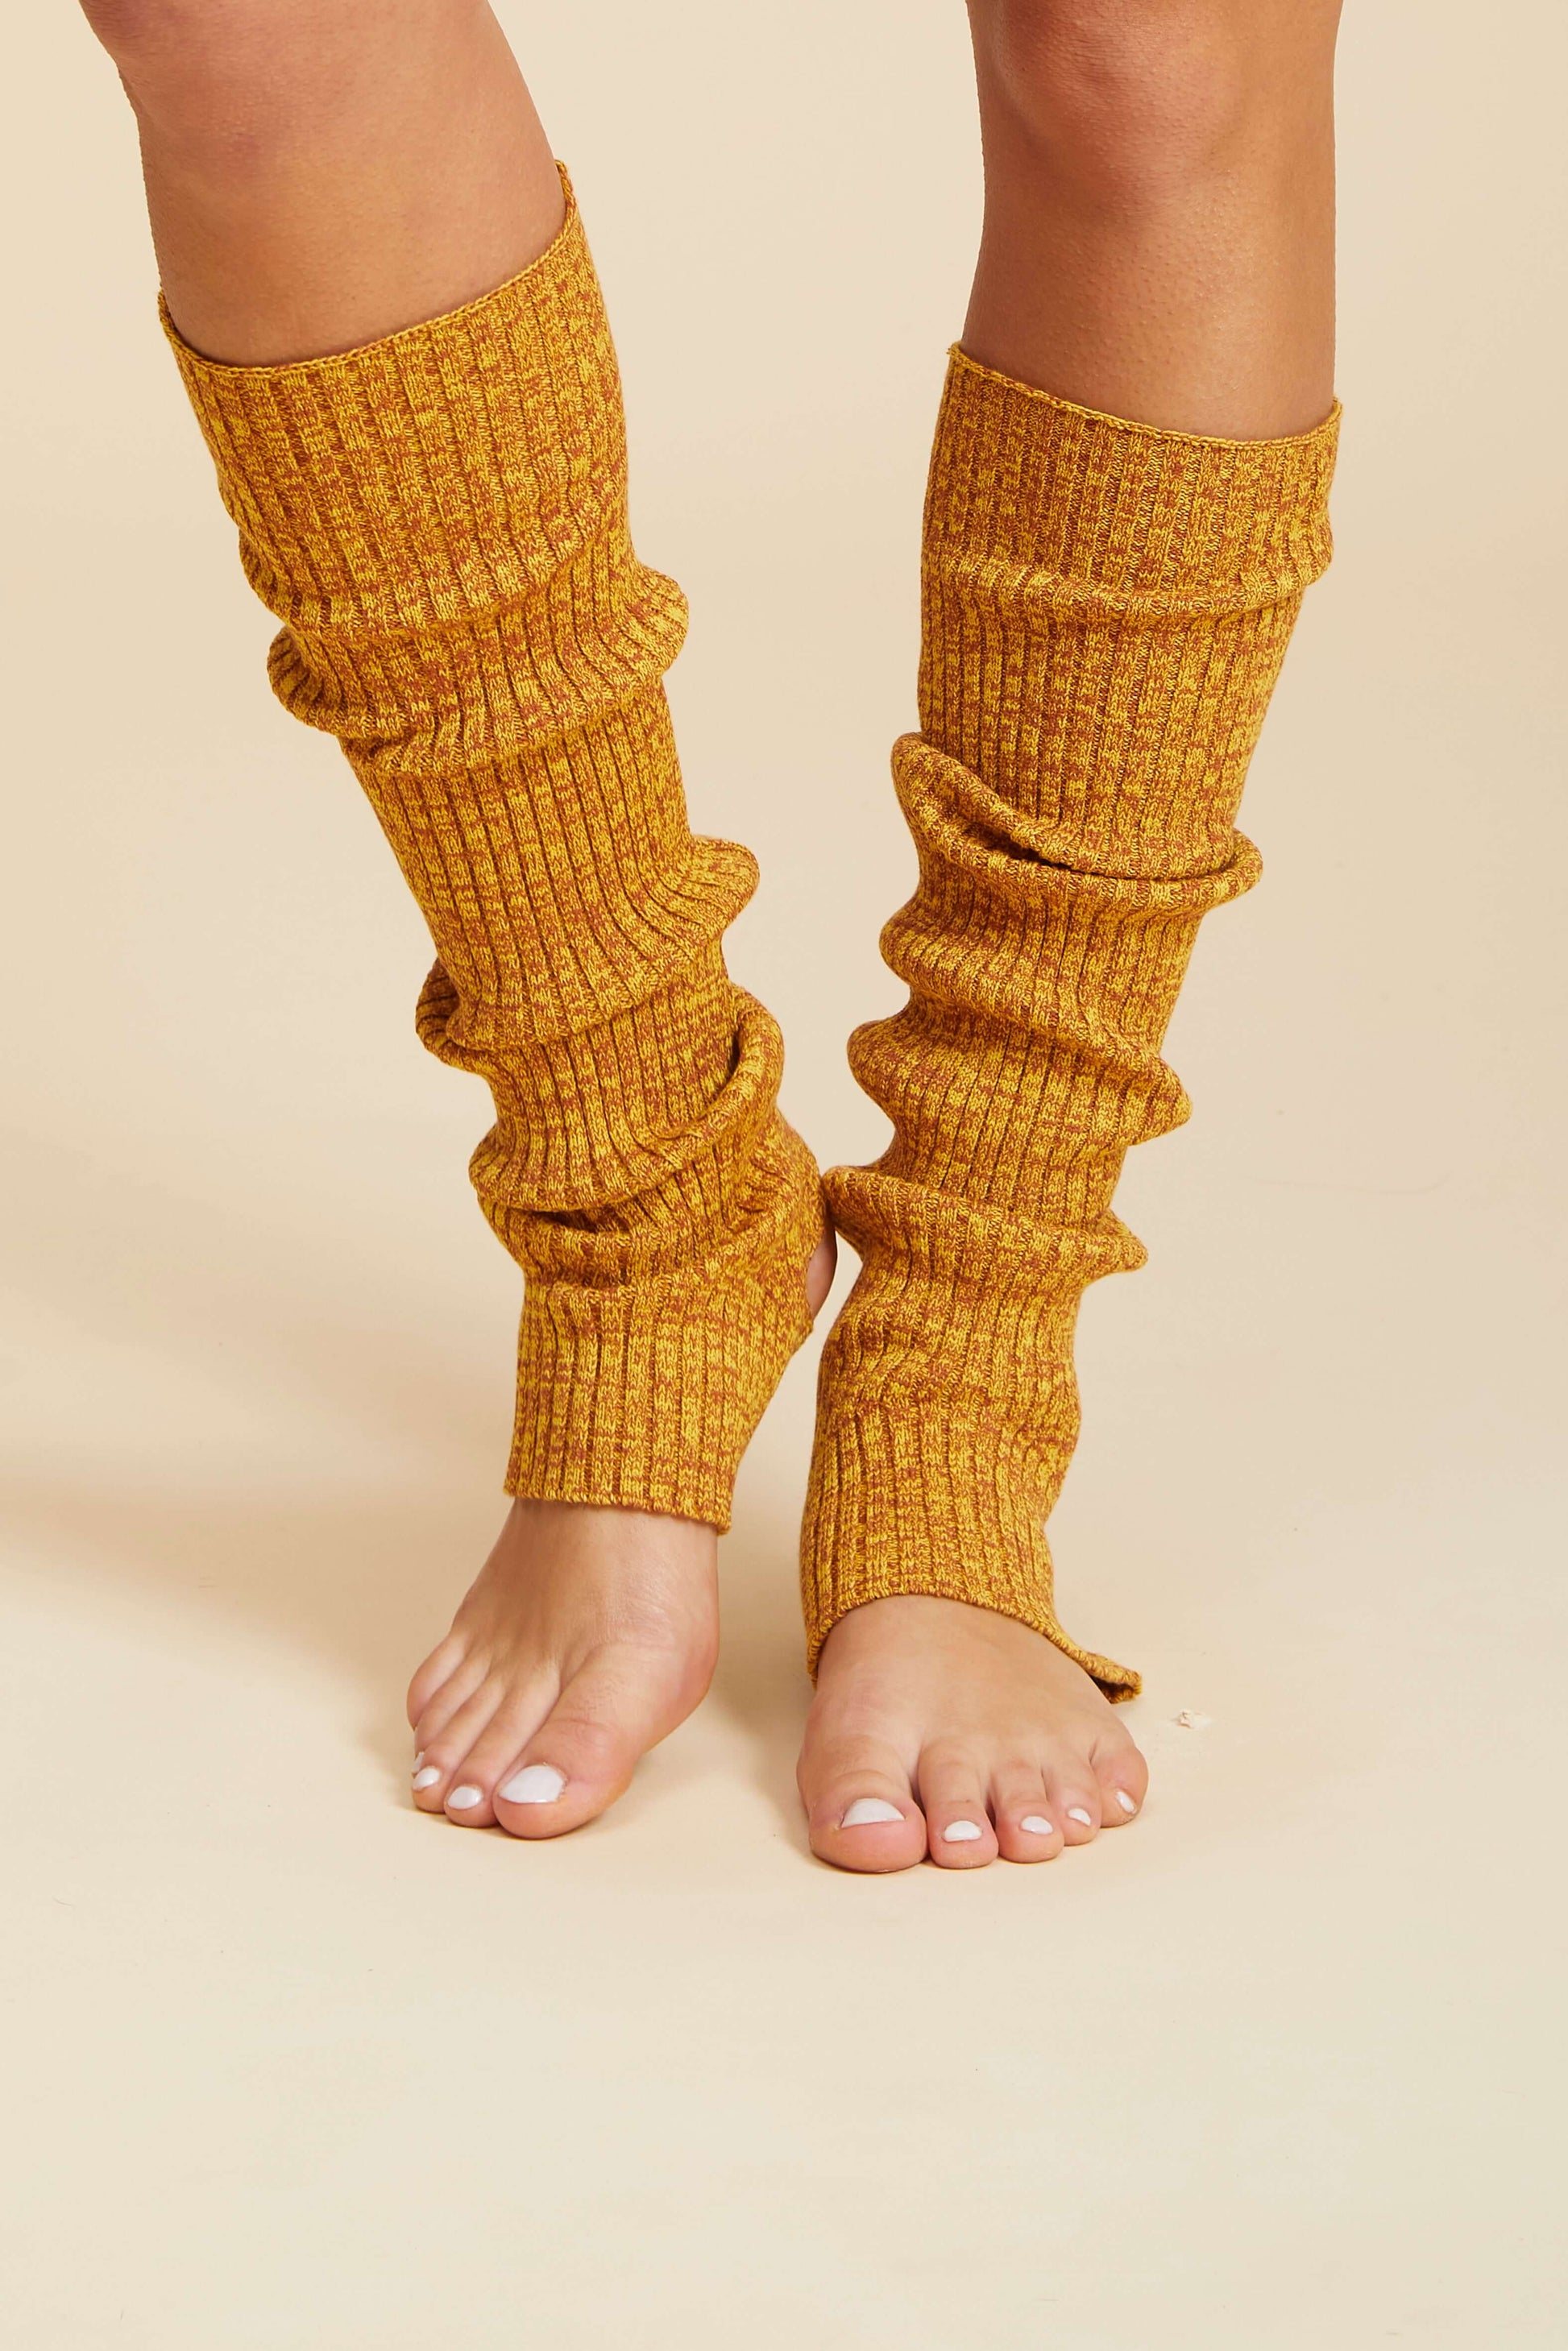 Leg Warmers Archive – Live The Process